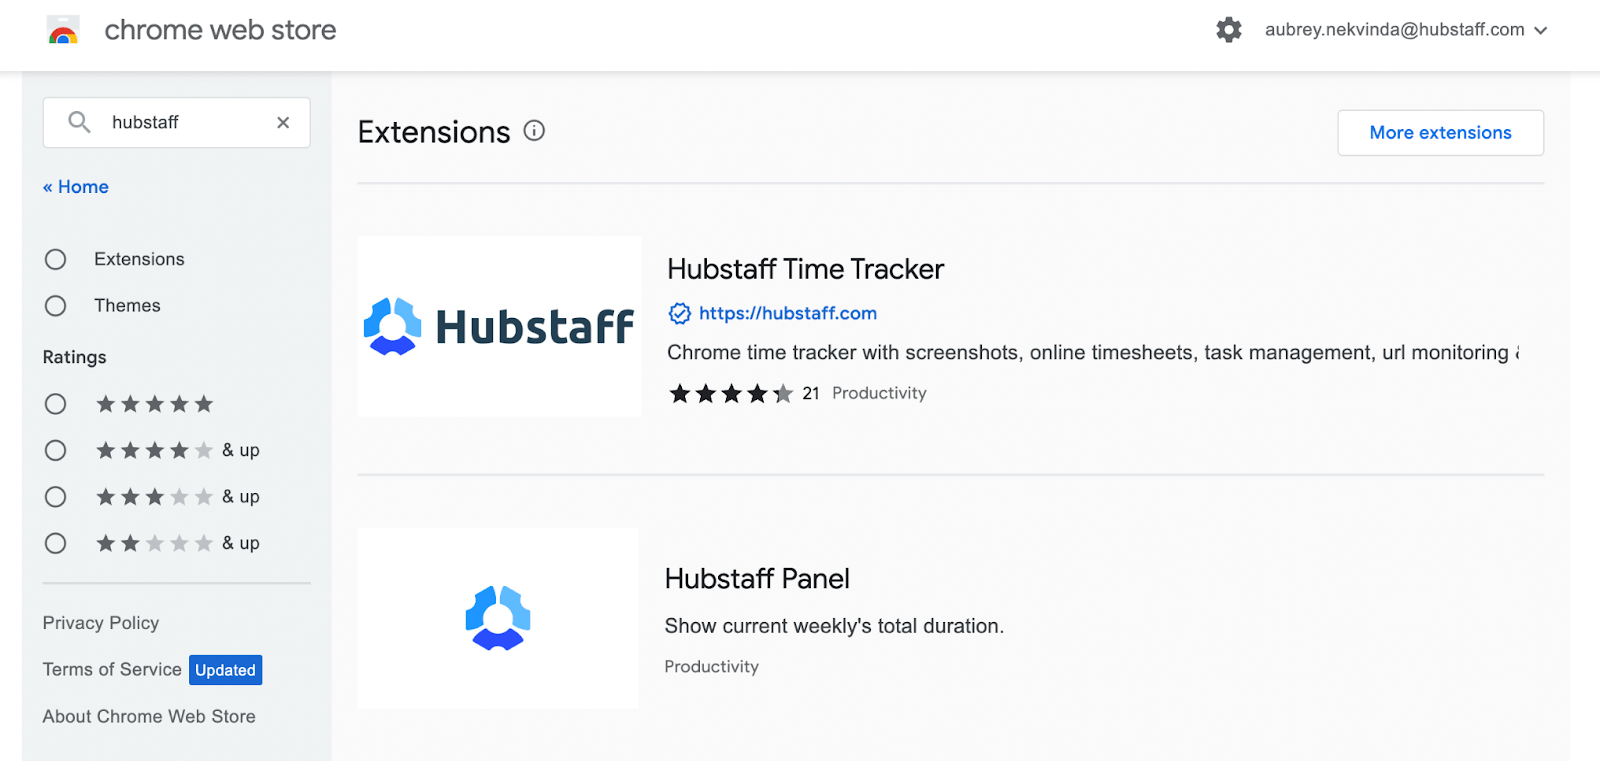 Search results for “Hubstaff” in Google Chrome Web Store